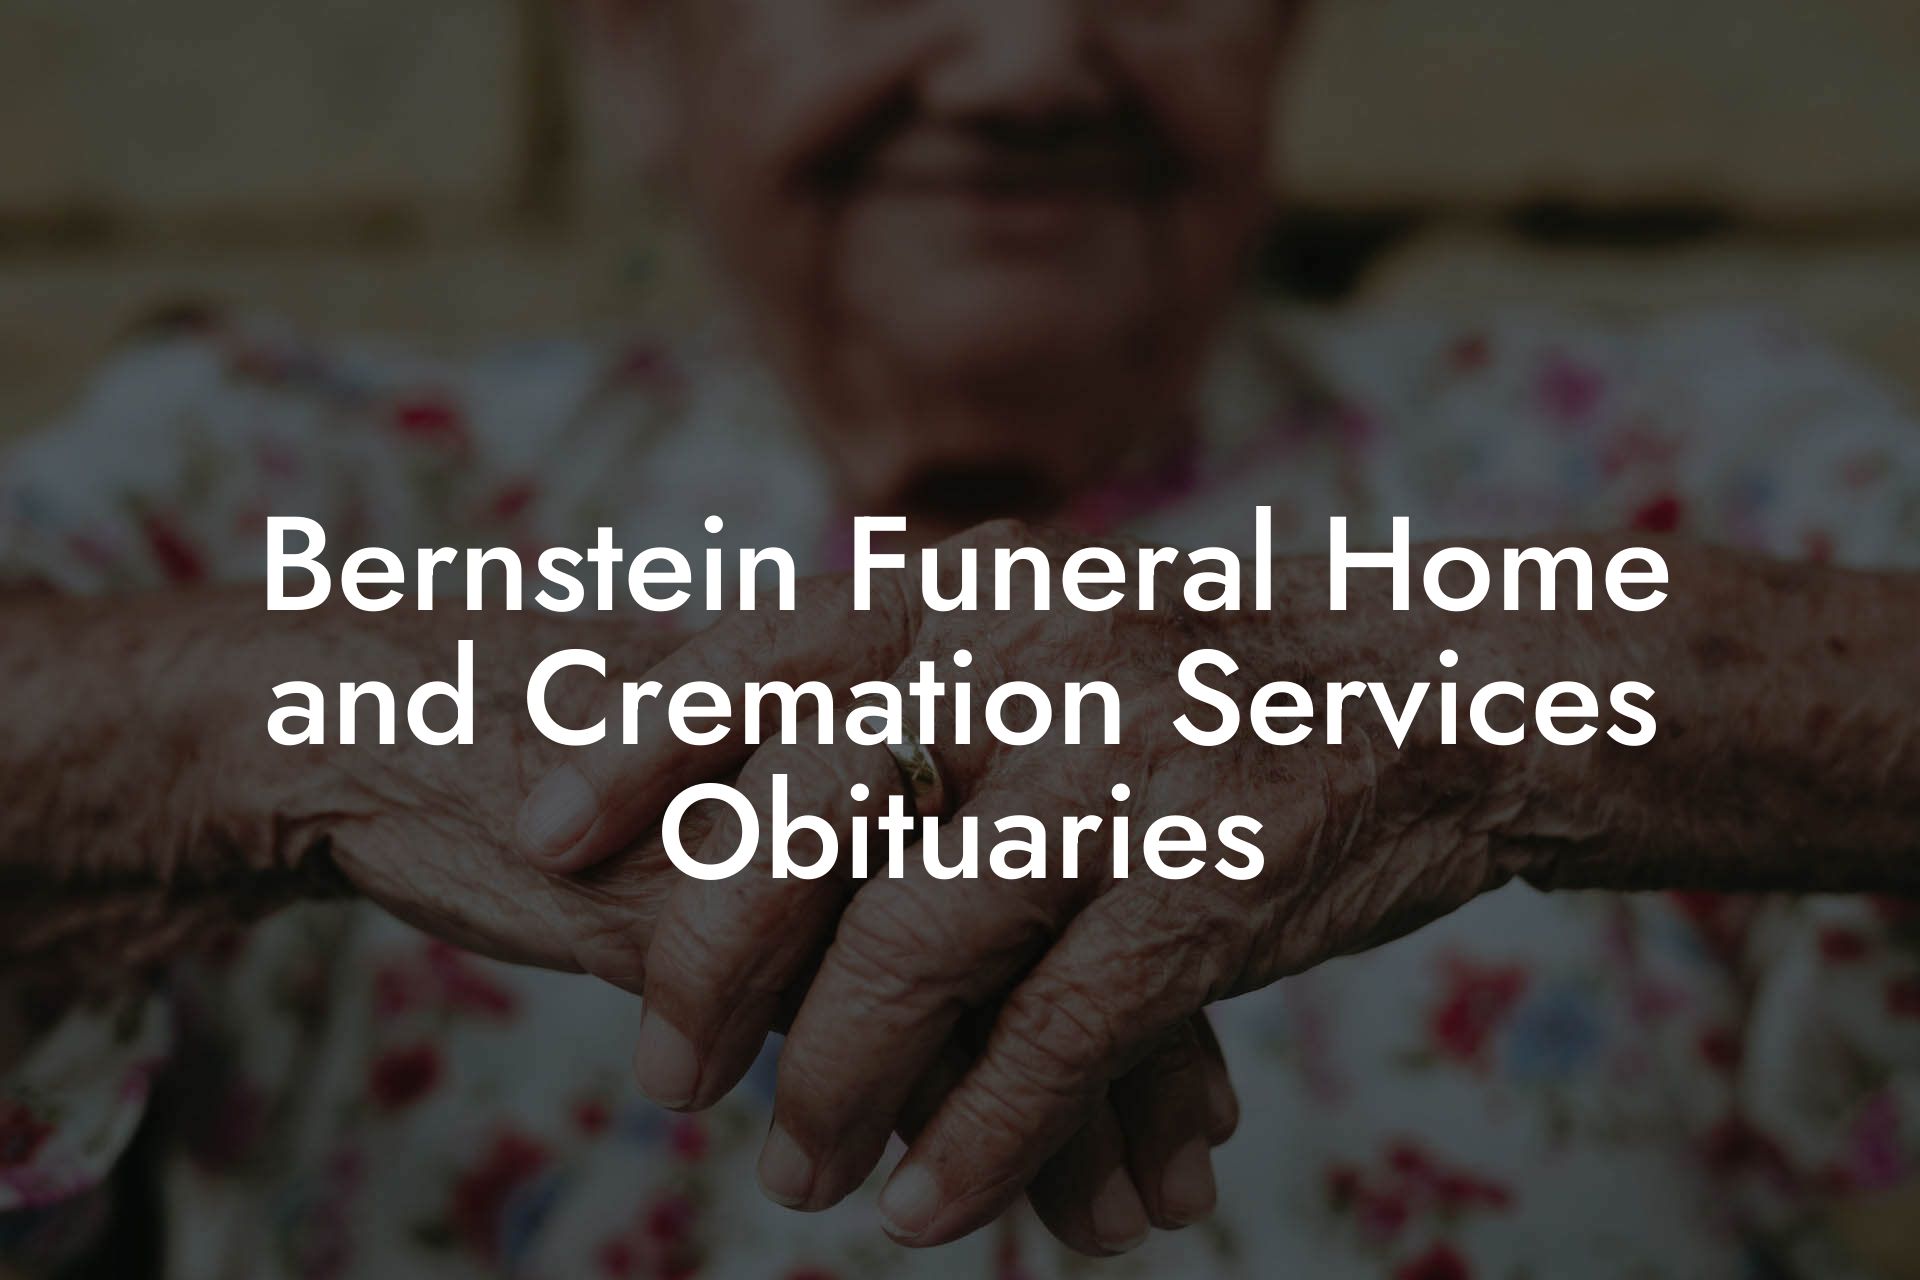 Bernstein Funeral Home and Cremation Services Obituaries